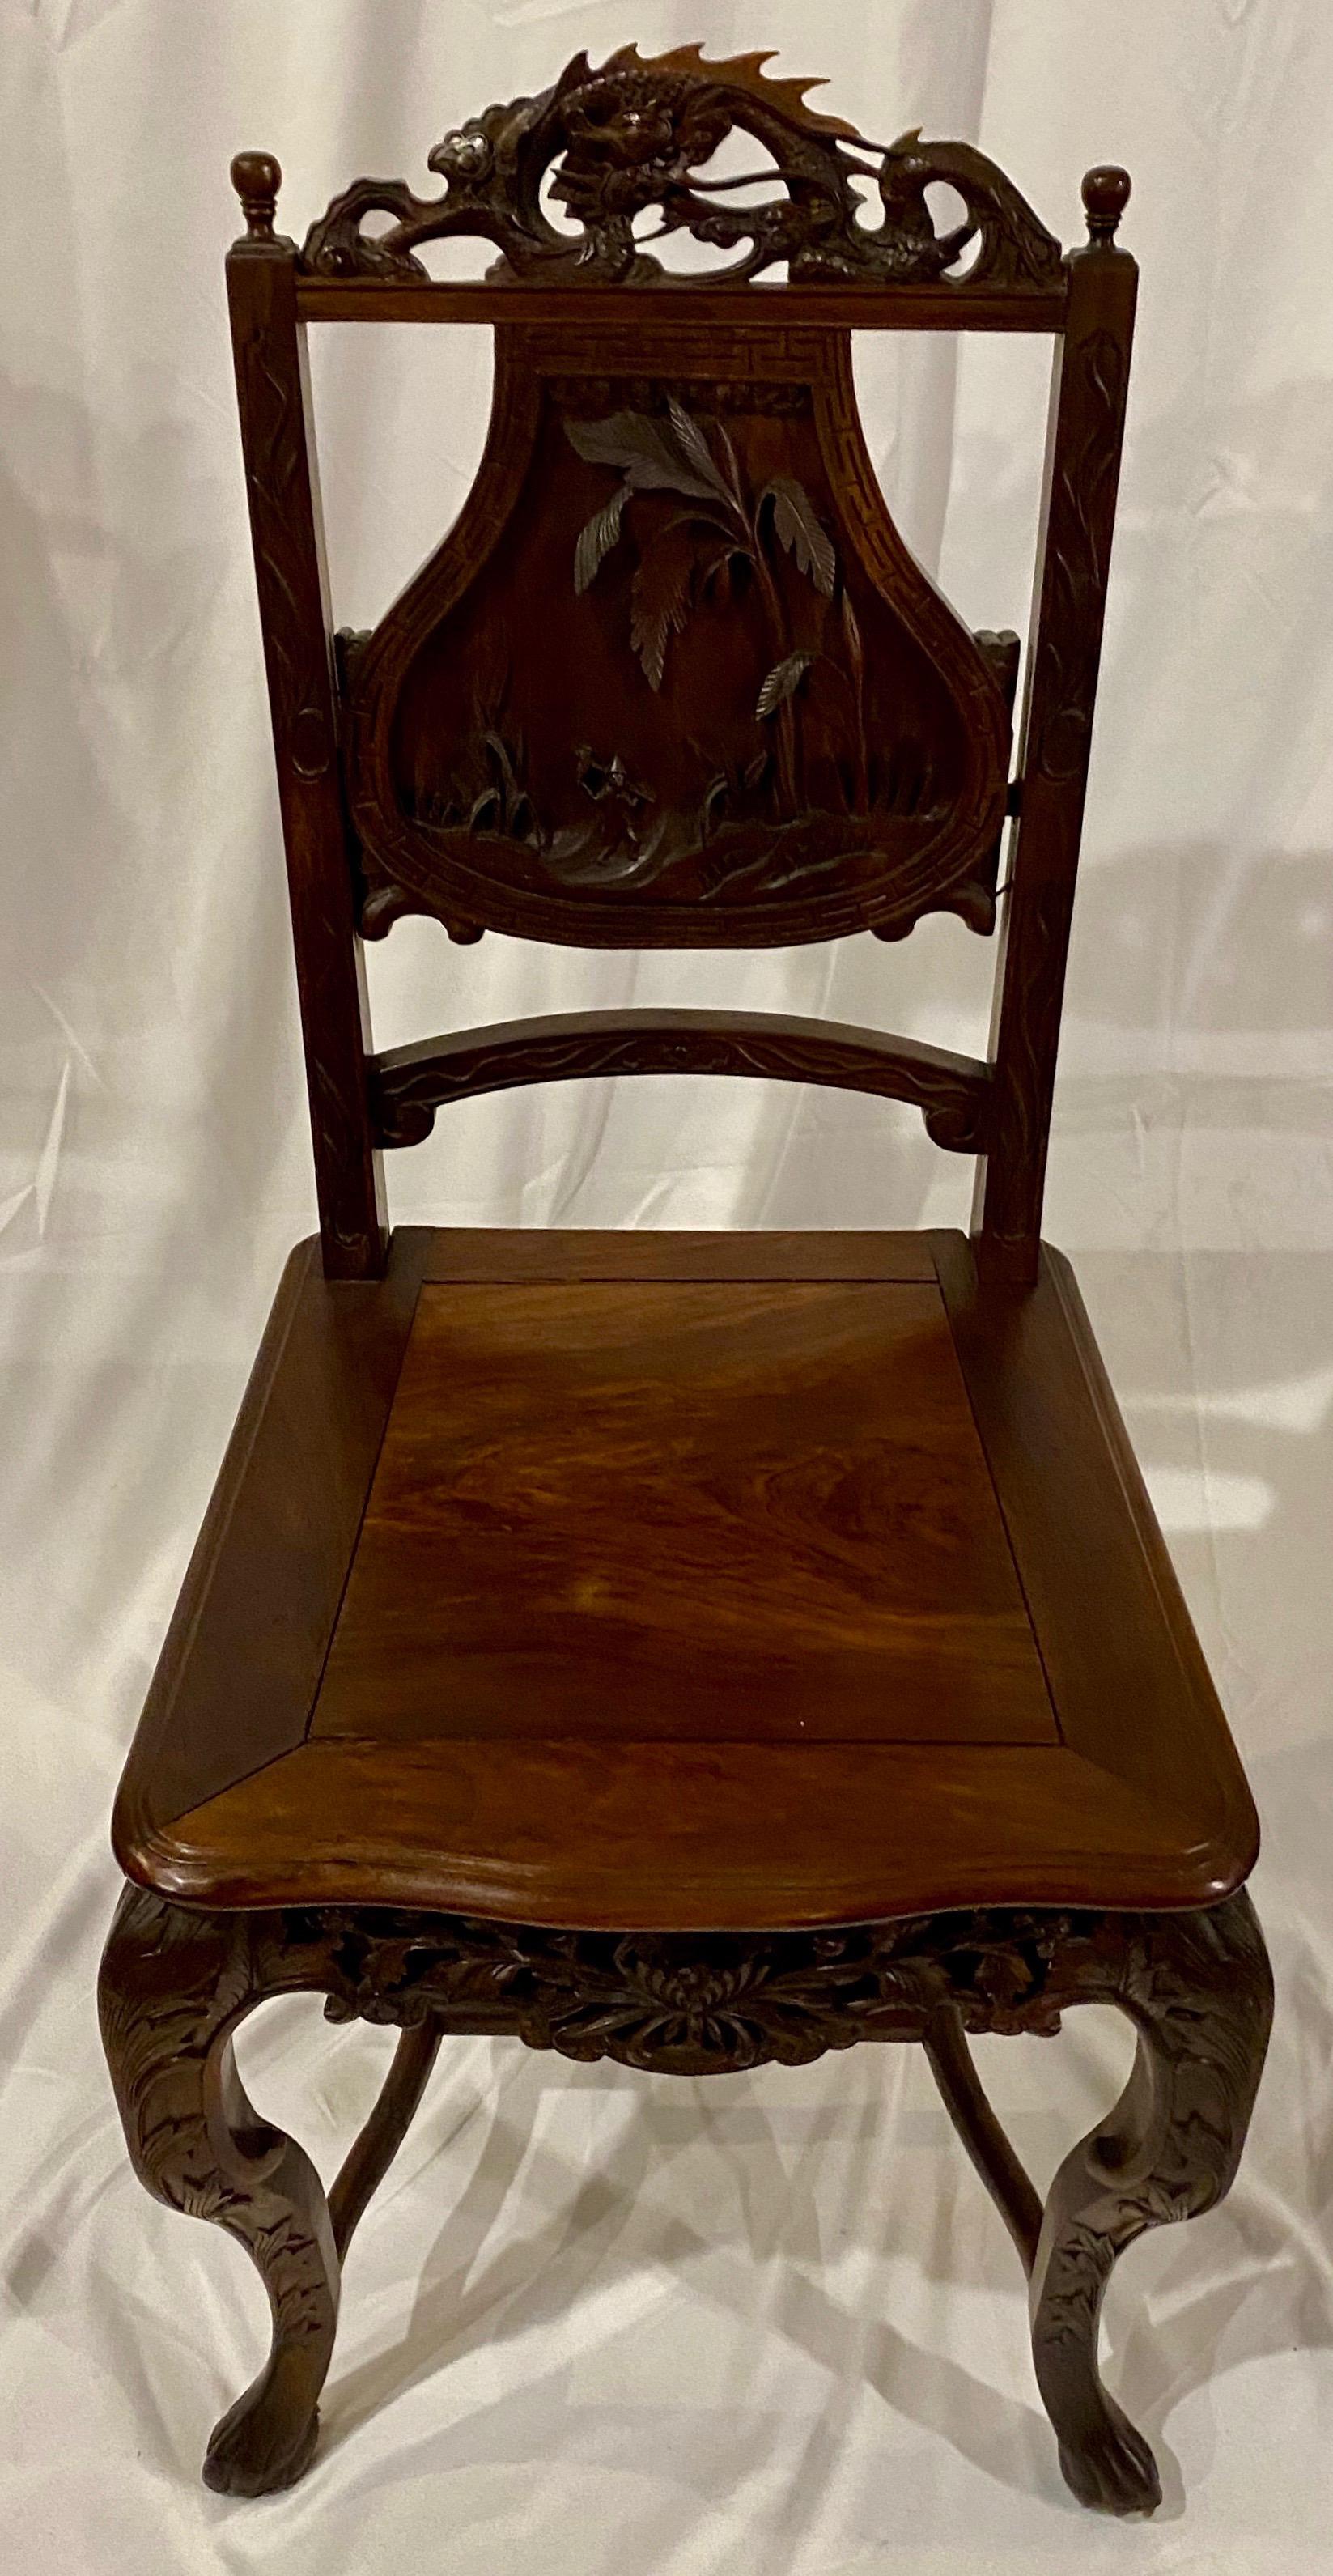 Pair of antique chinoiserie carved teak 19th century chairs 
MISC860.